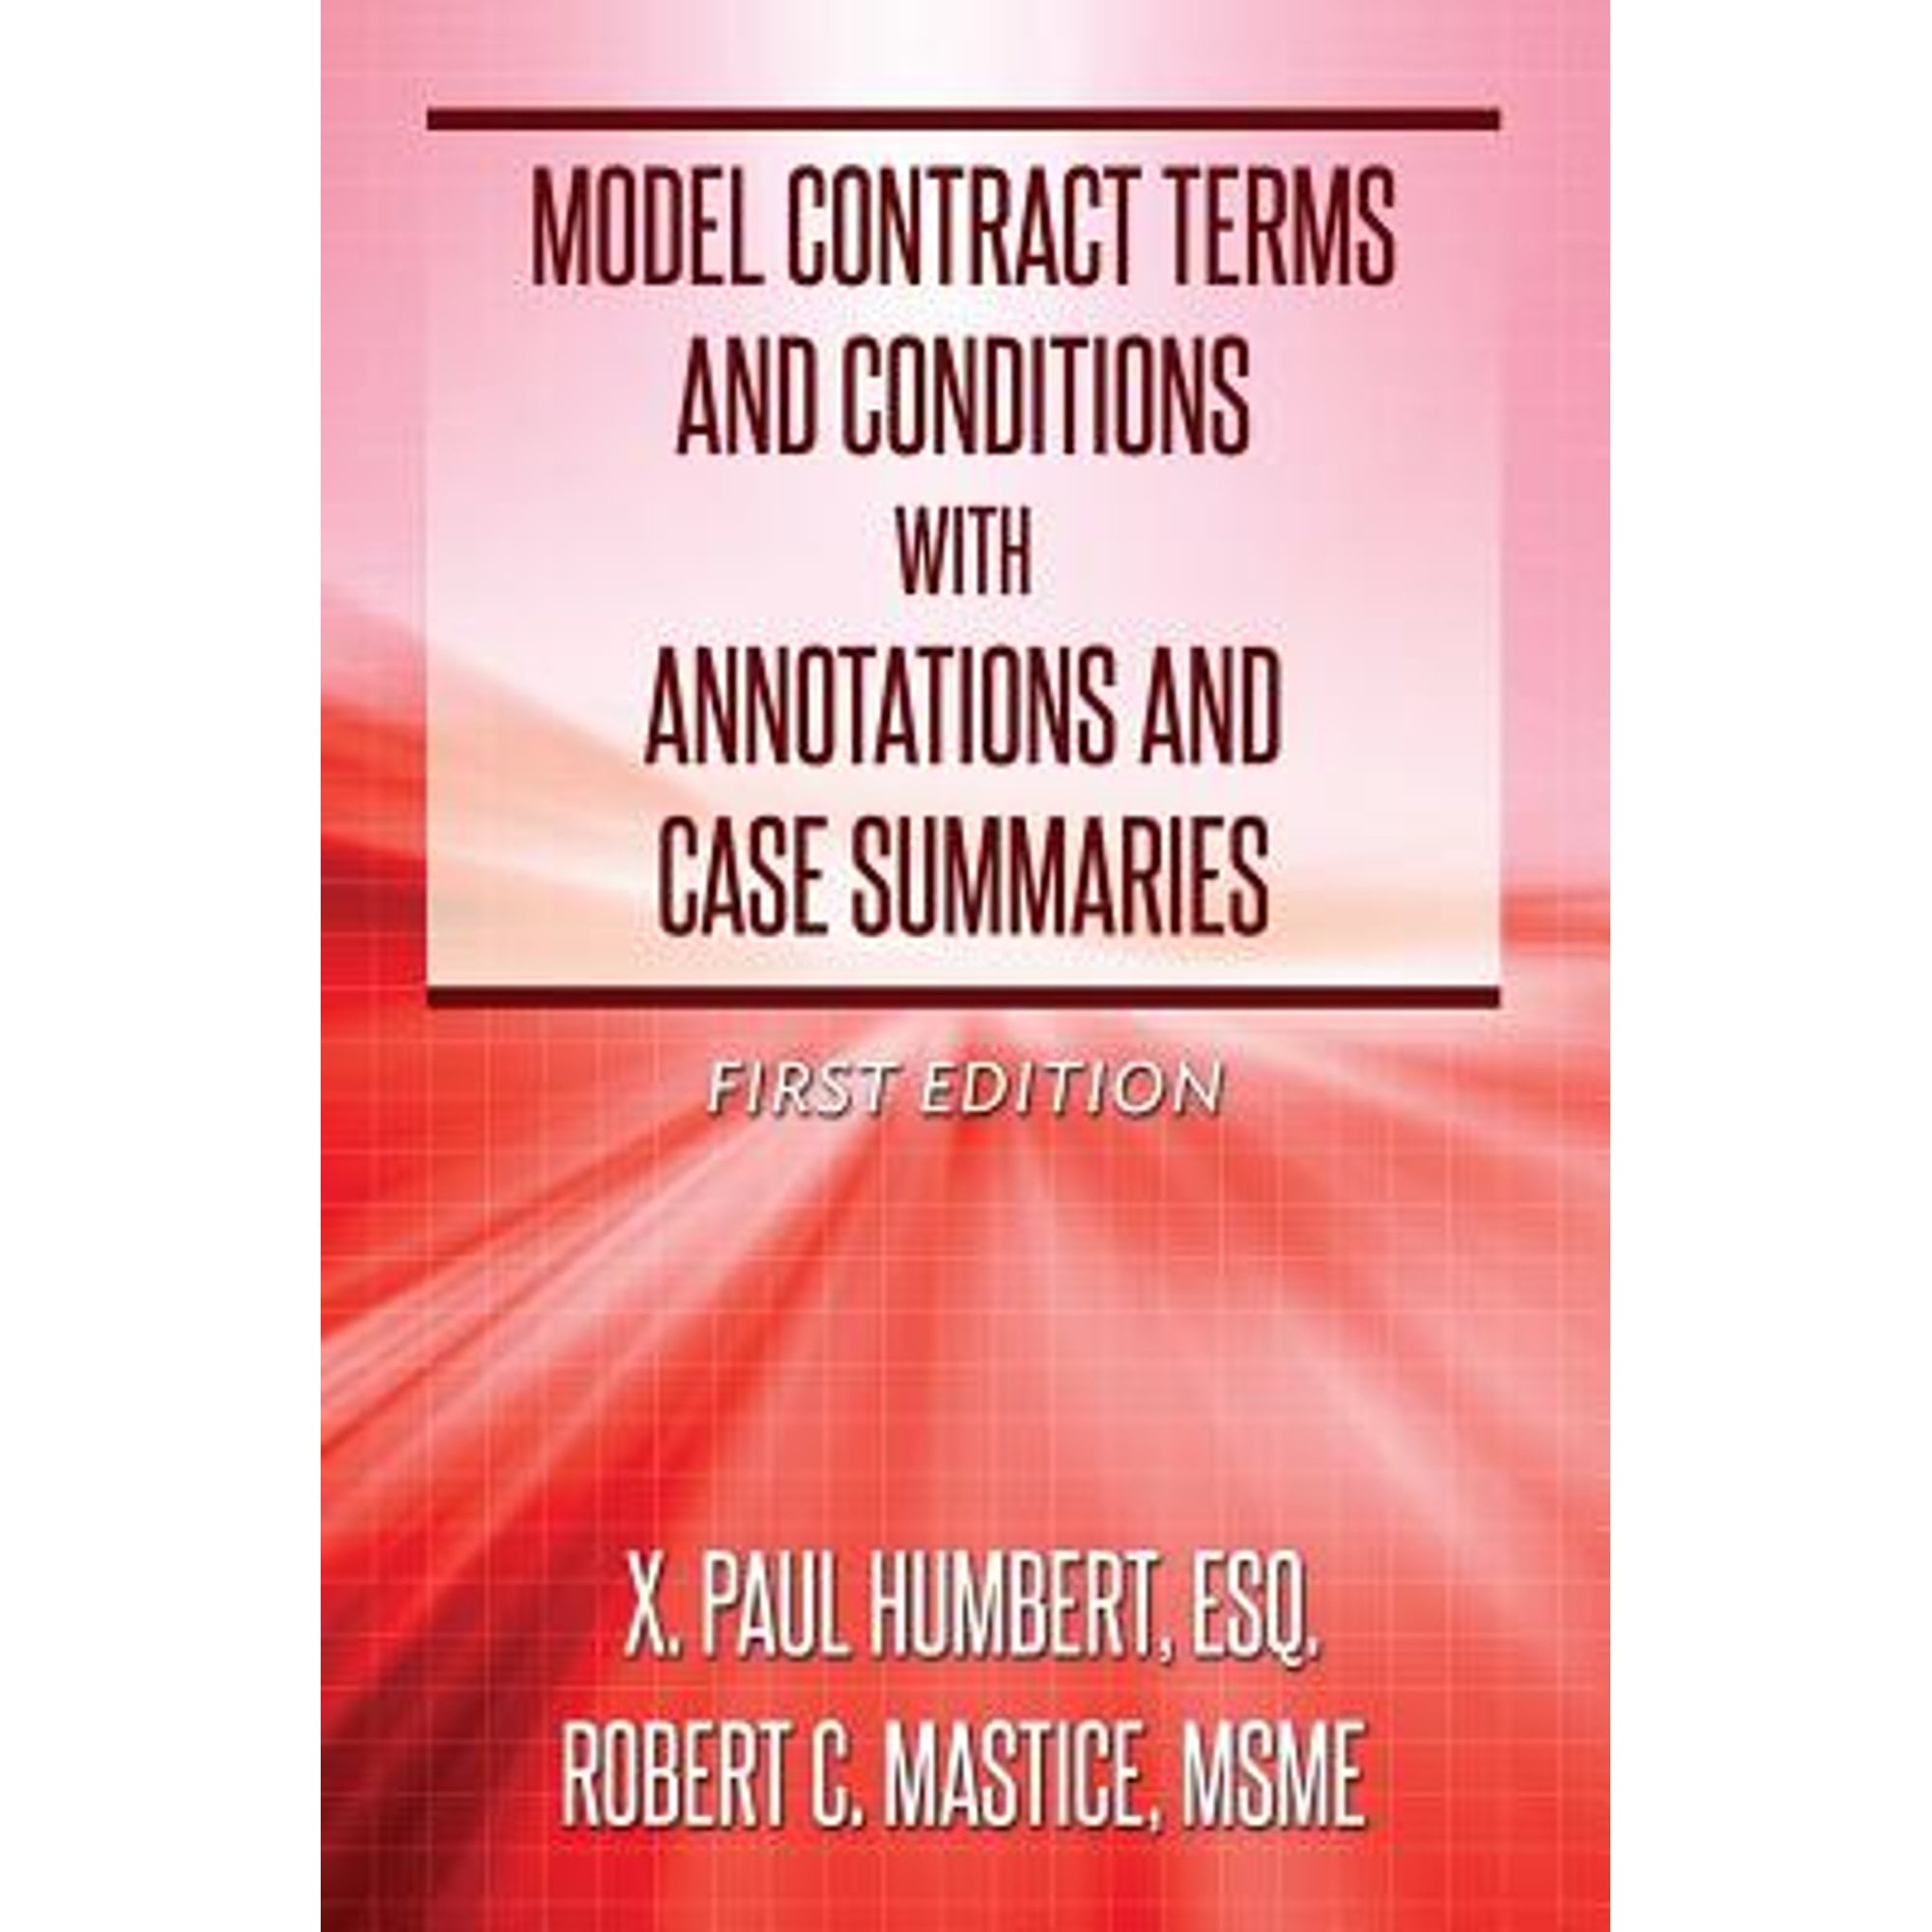 Pre-Owned Model Contract Terms and Conditions with Annotations and Case Summaries (Paperback) by Robert C Mastice, X Paul Humbert